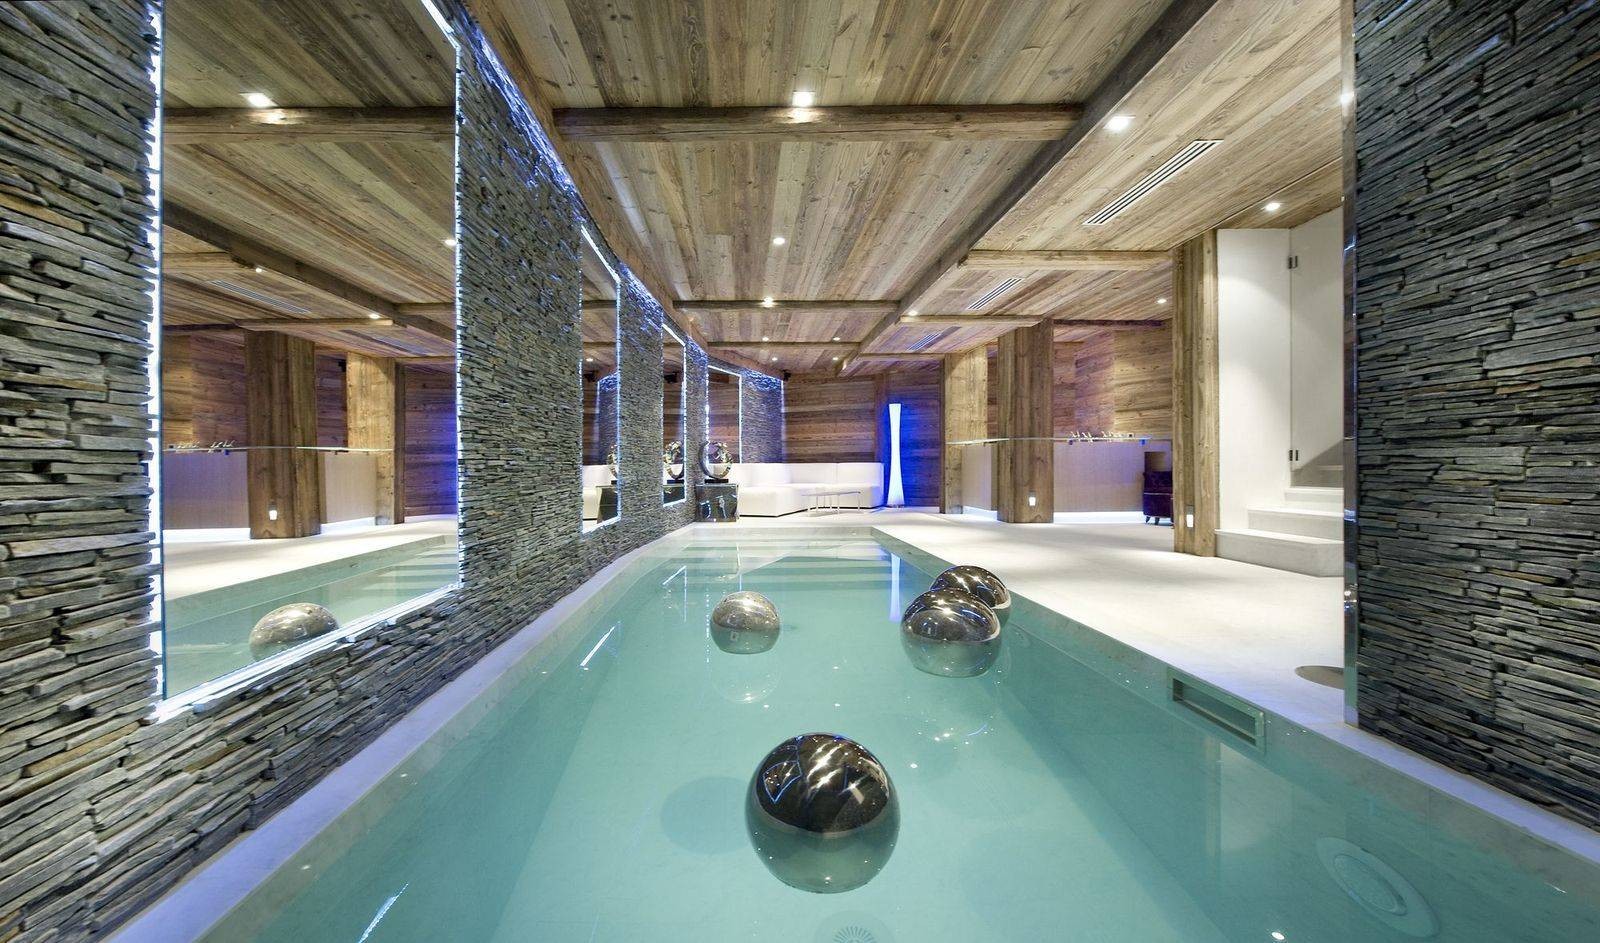  Courchevel 1850 Luxury Rental Chalet Crysotile Pool 2